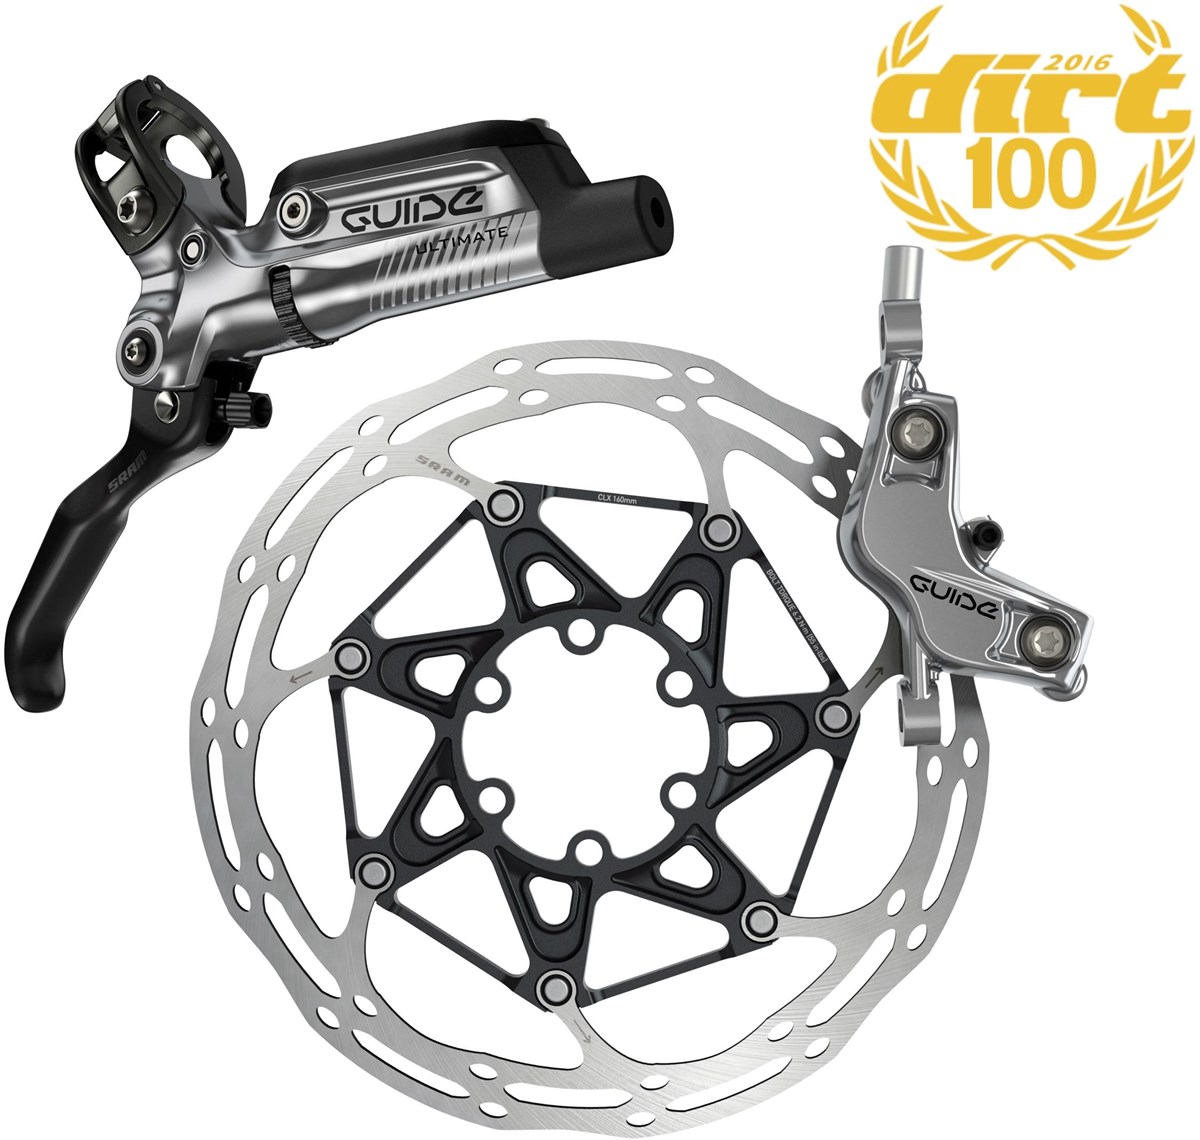 SRAM Guide Ultimate Front Disc Brake - Ti Hardware (Rotor/Mount Sold Separately) product image